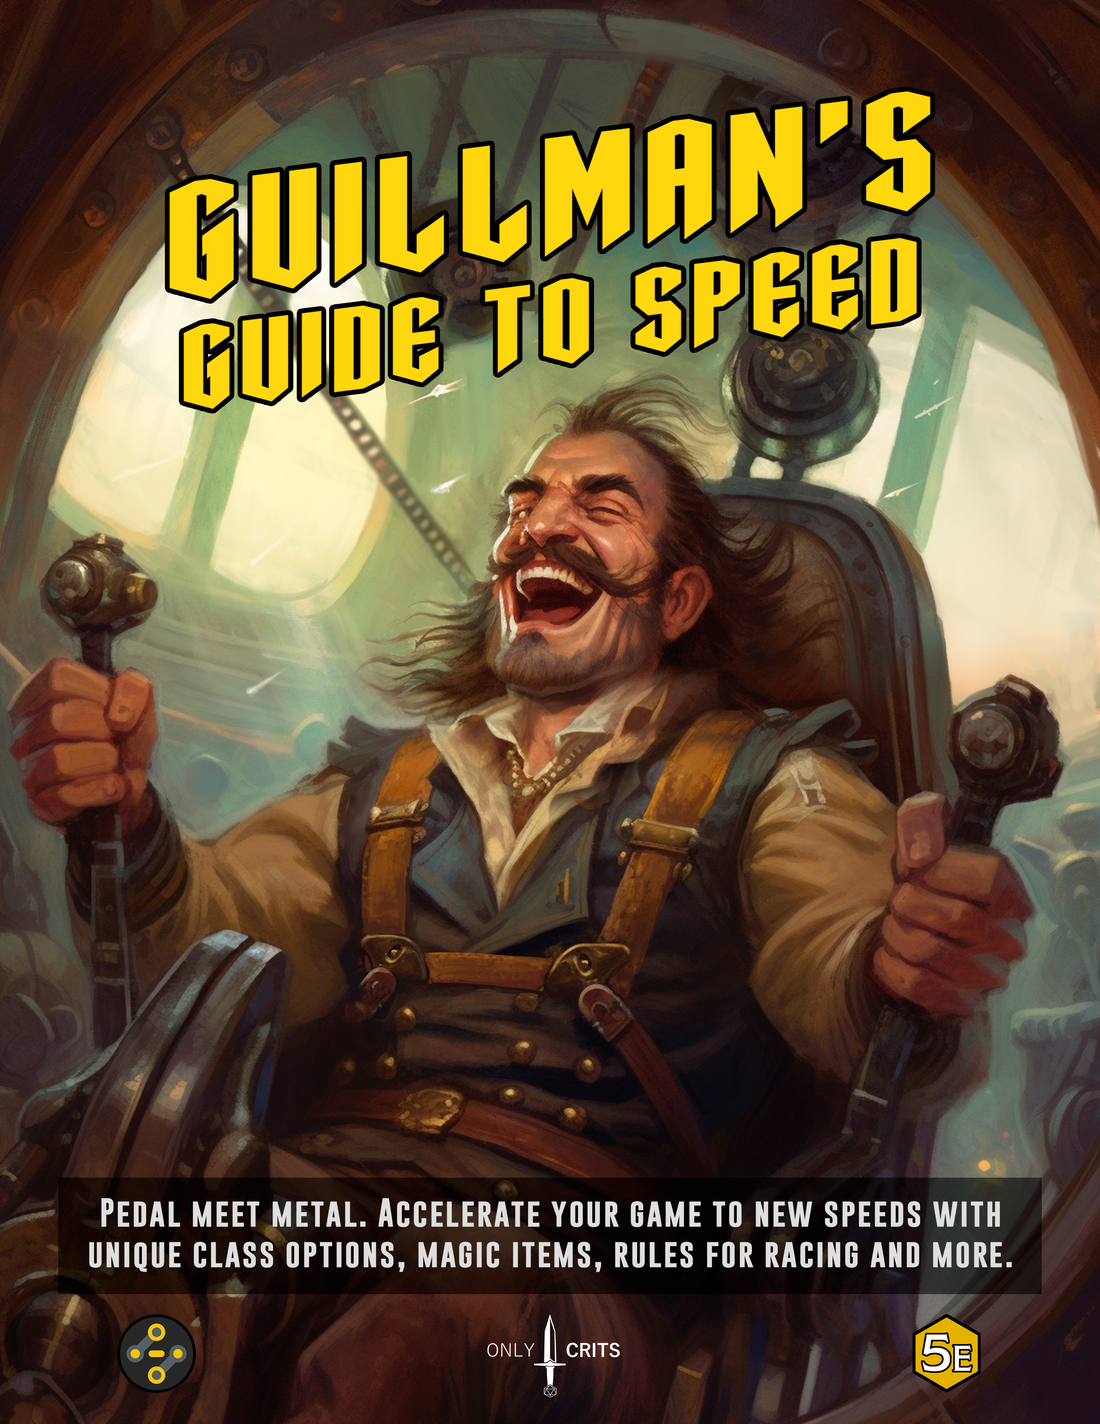 Guillman's Guide to Speed: From then till Now